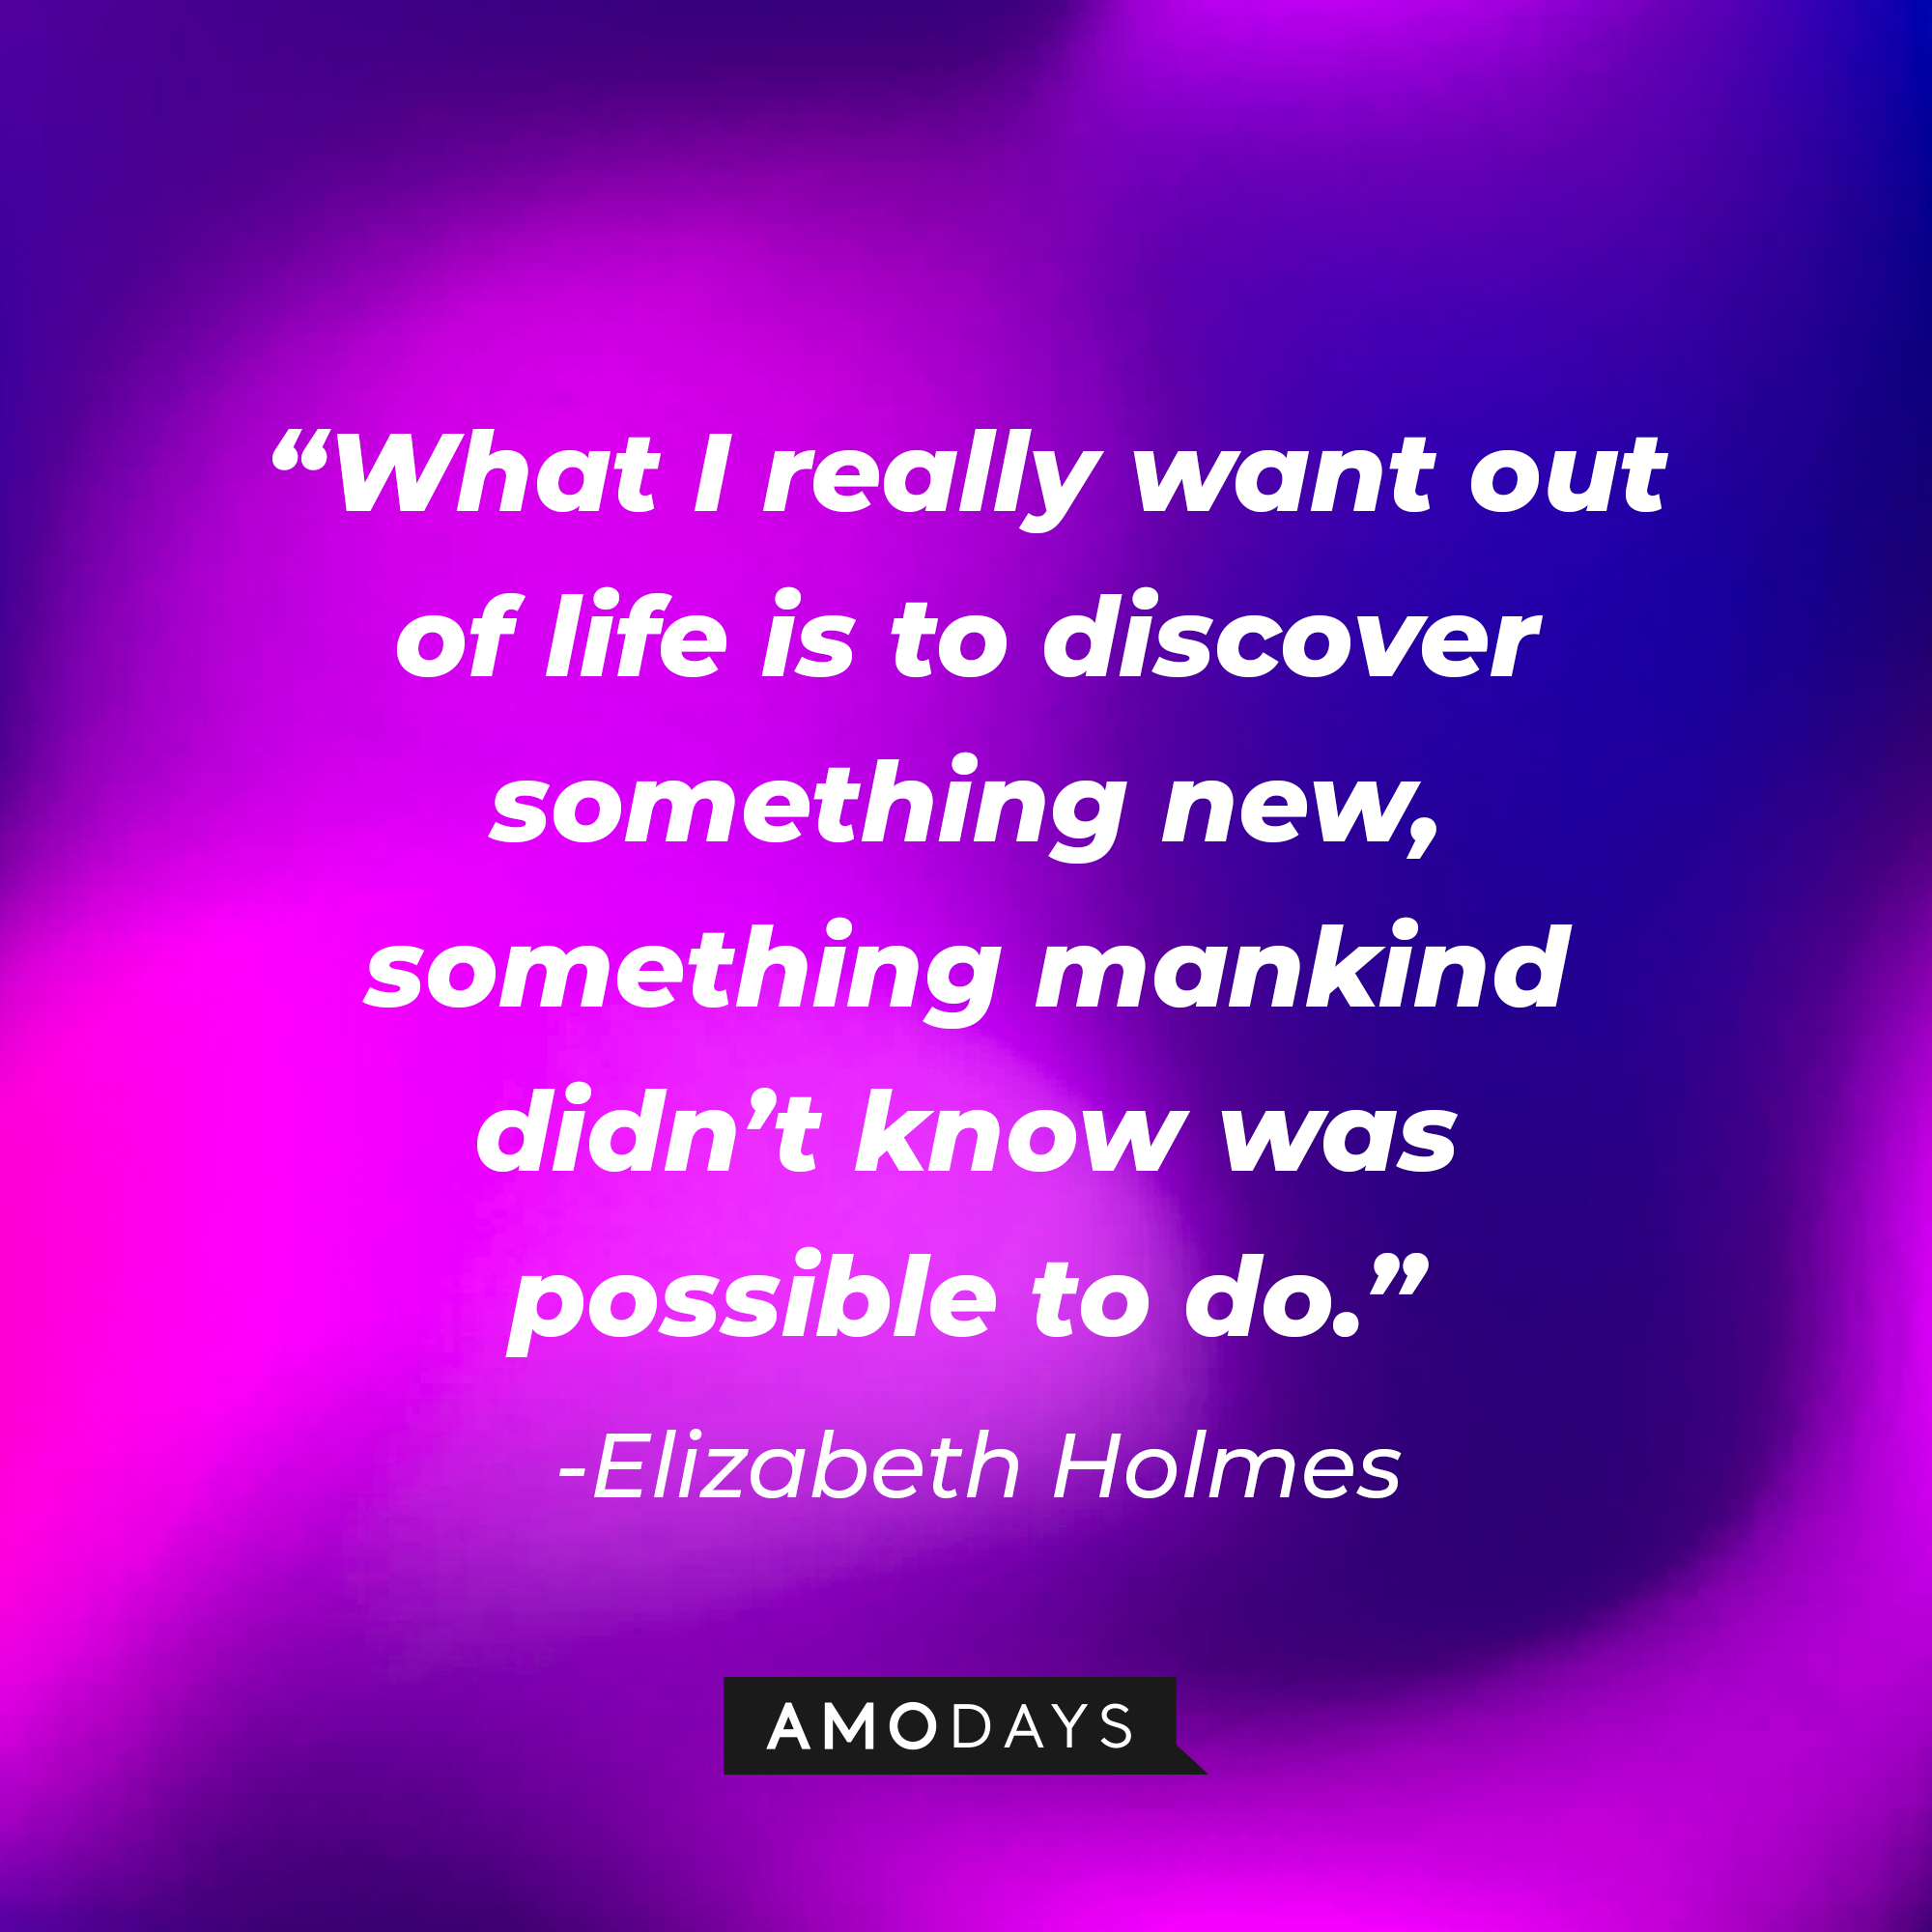 Elizabeth Holmes' quote: "What I really want out of life is to discover something new, something mankind didn’t know was possible to do." | Source: Amodays